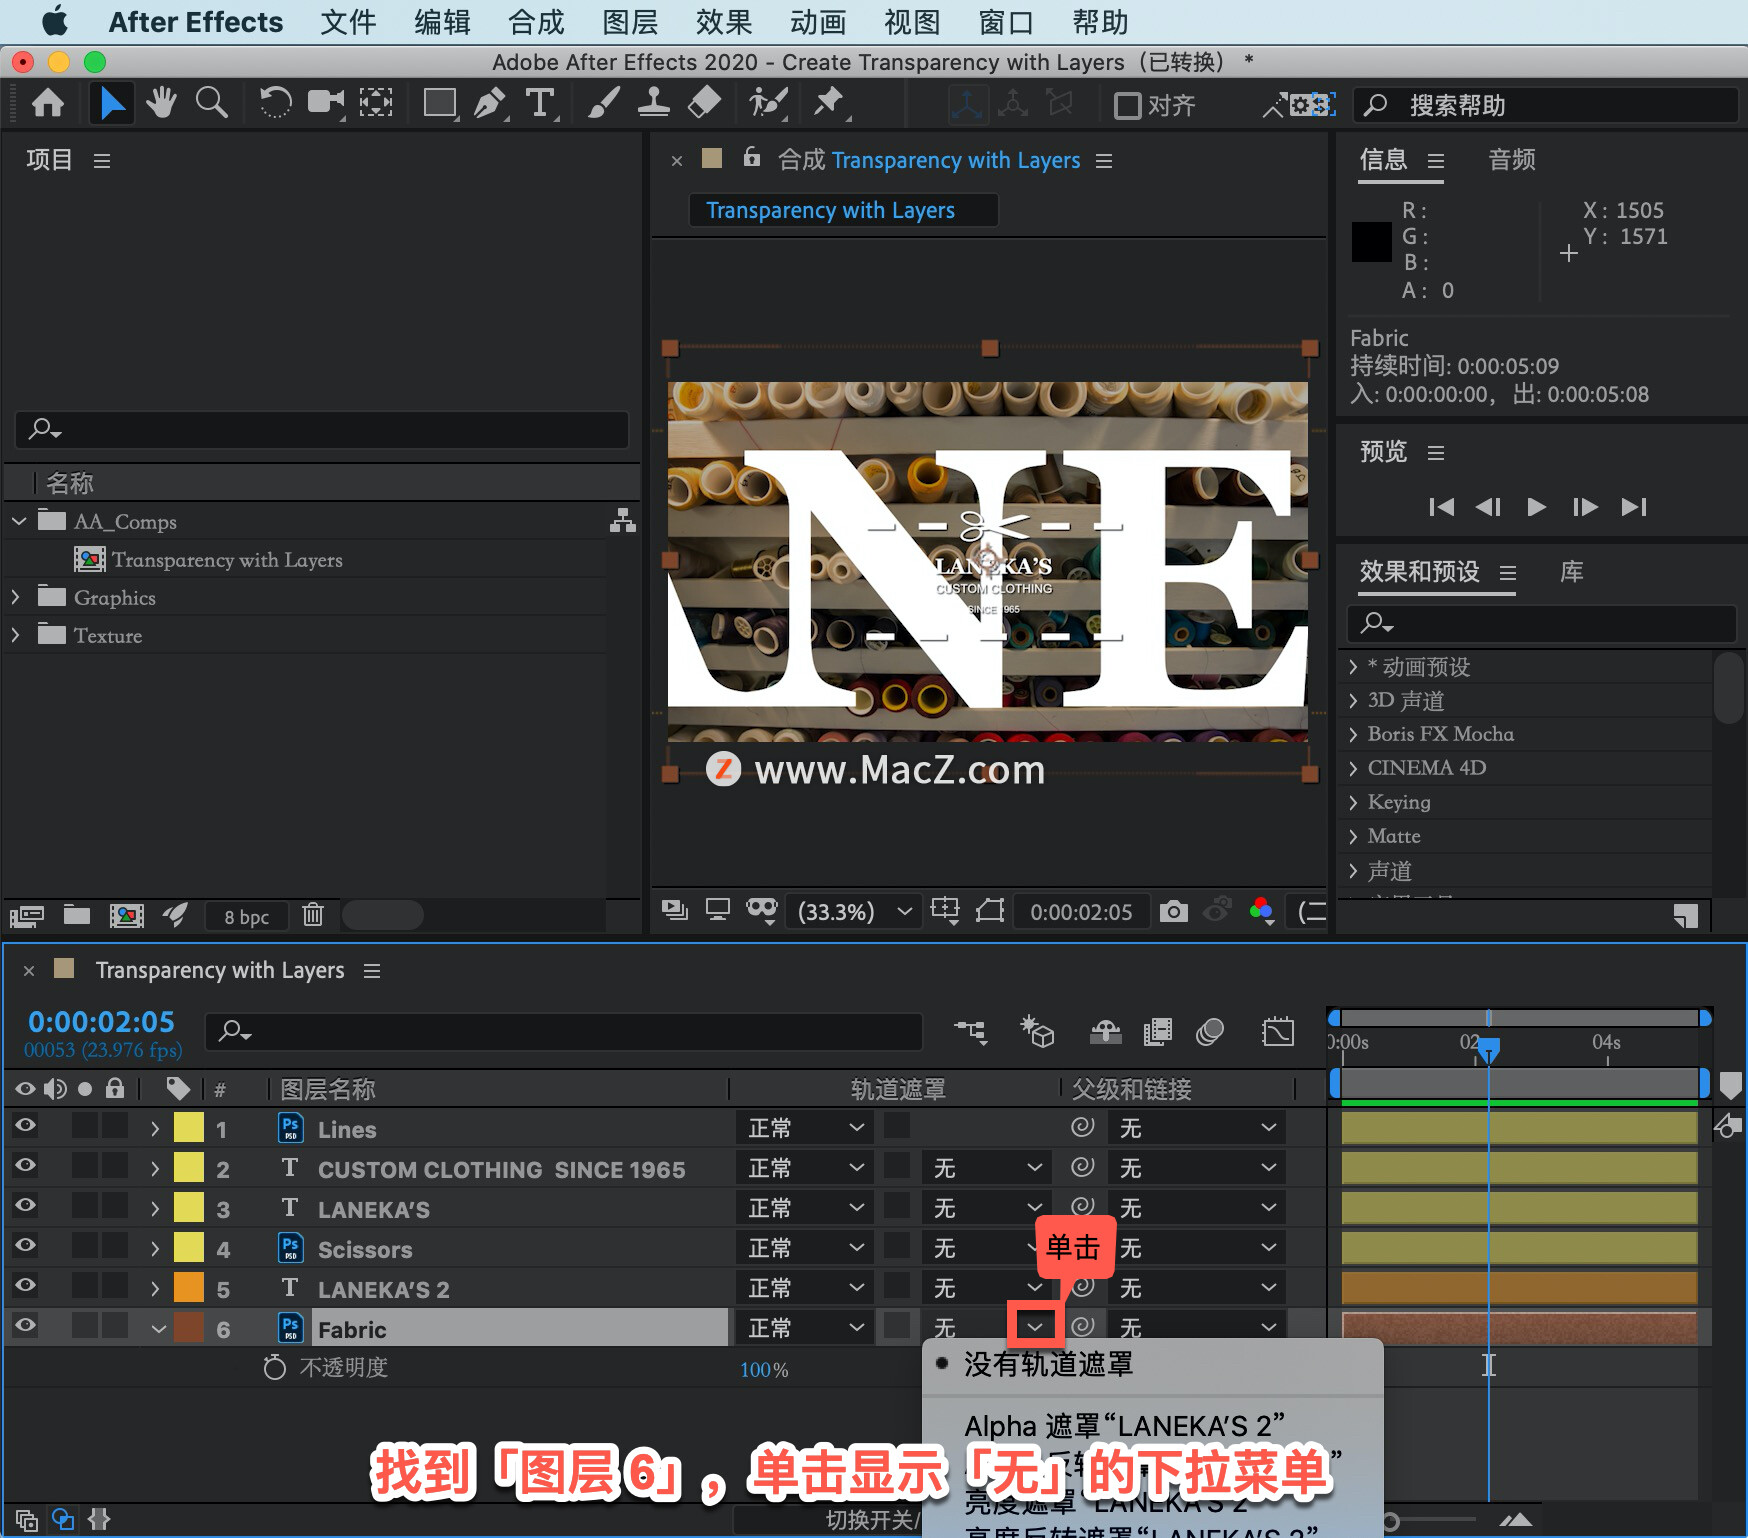 After Effects 教程「30」，如何在 After Effects 中使用图层创建透明效果？